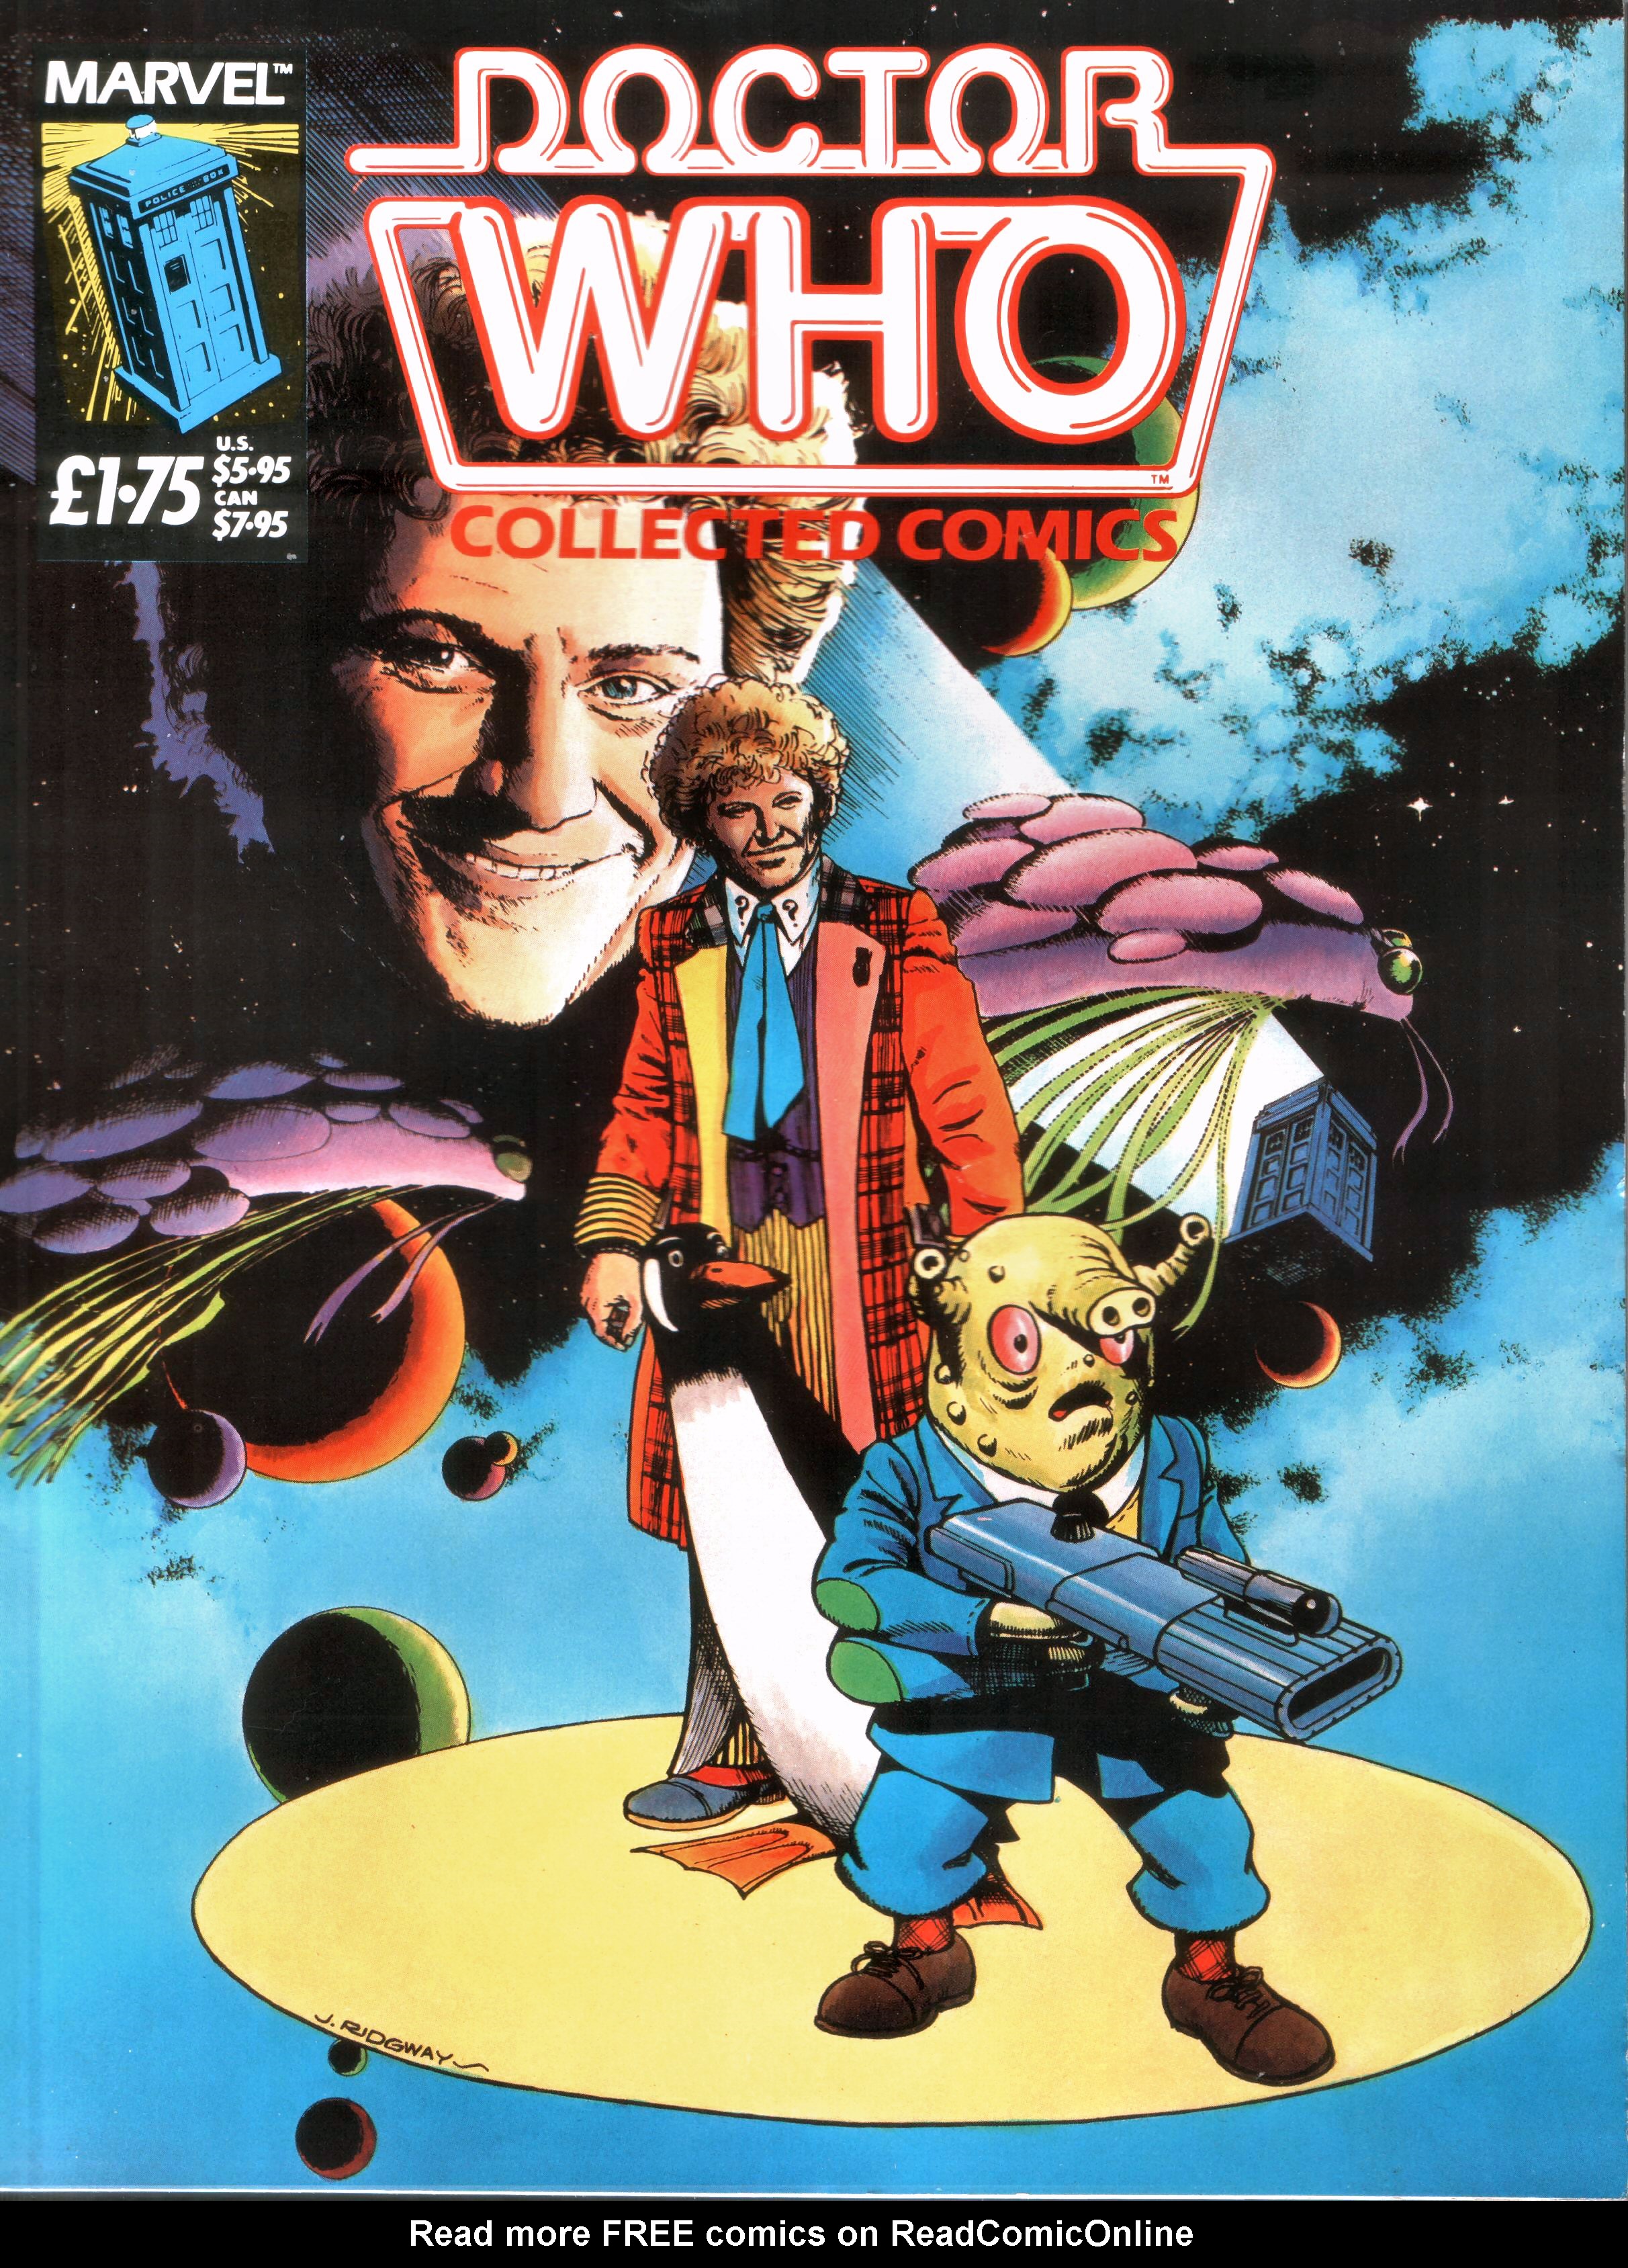 Read online Doctor Who Collected Comics comic -  Issue # Full - 1